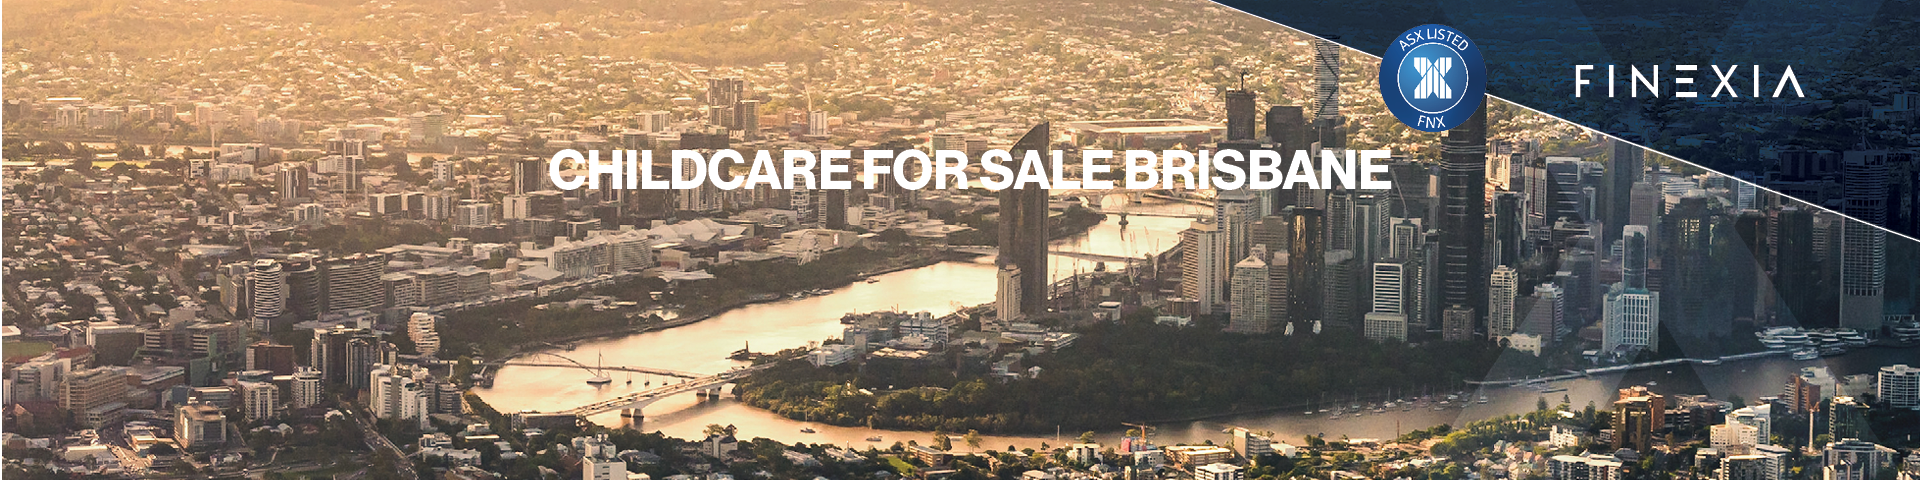 10 Essential Insights on Childcare for Sale in Brisbane